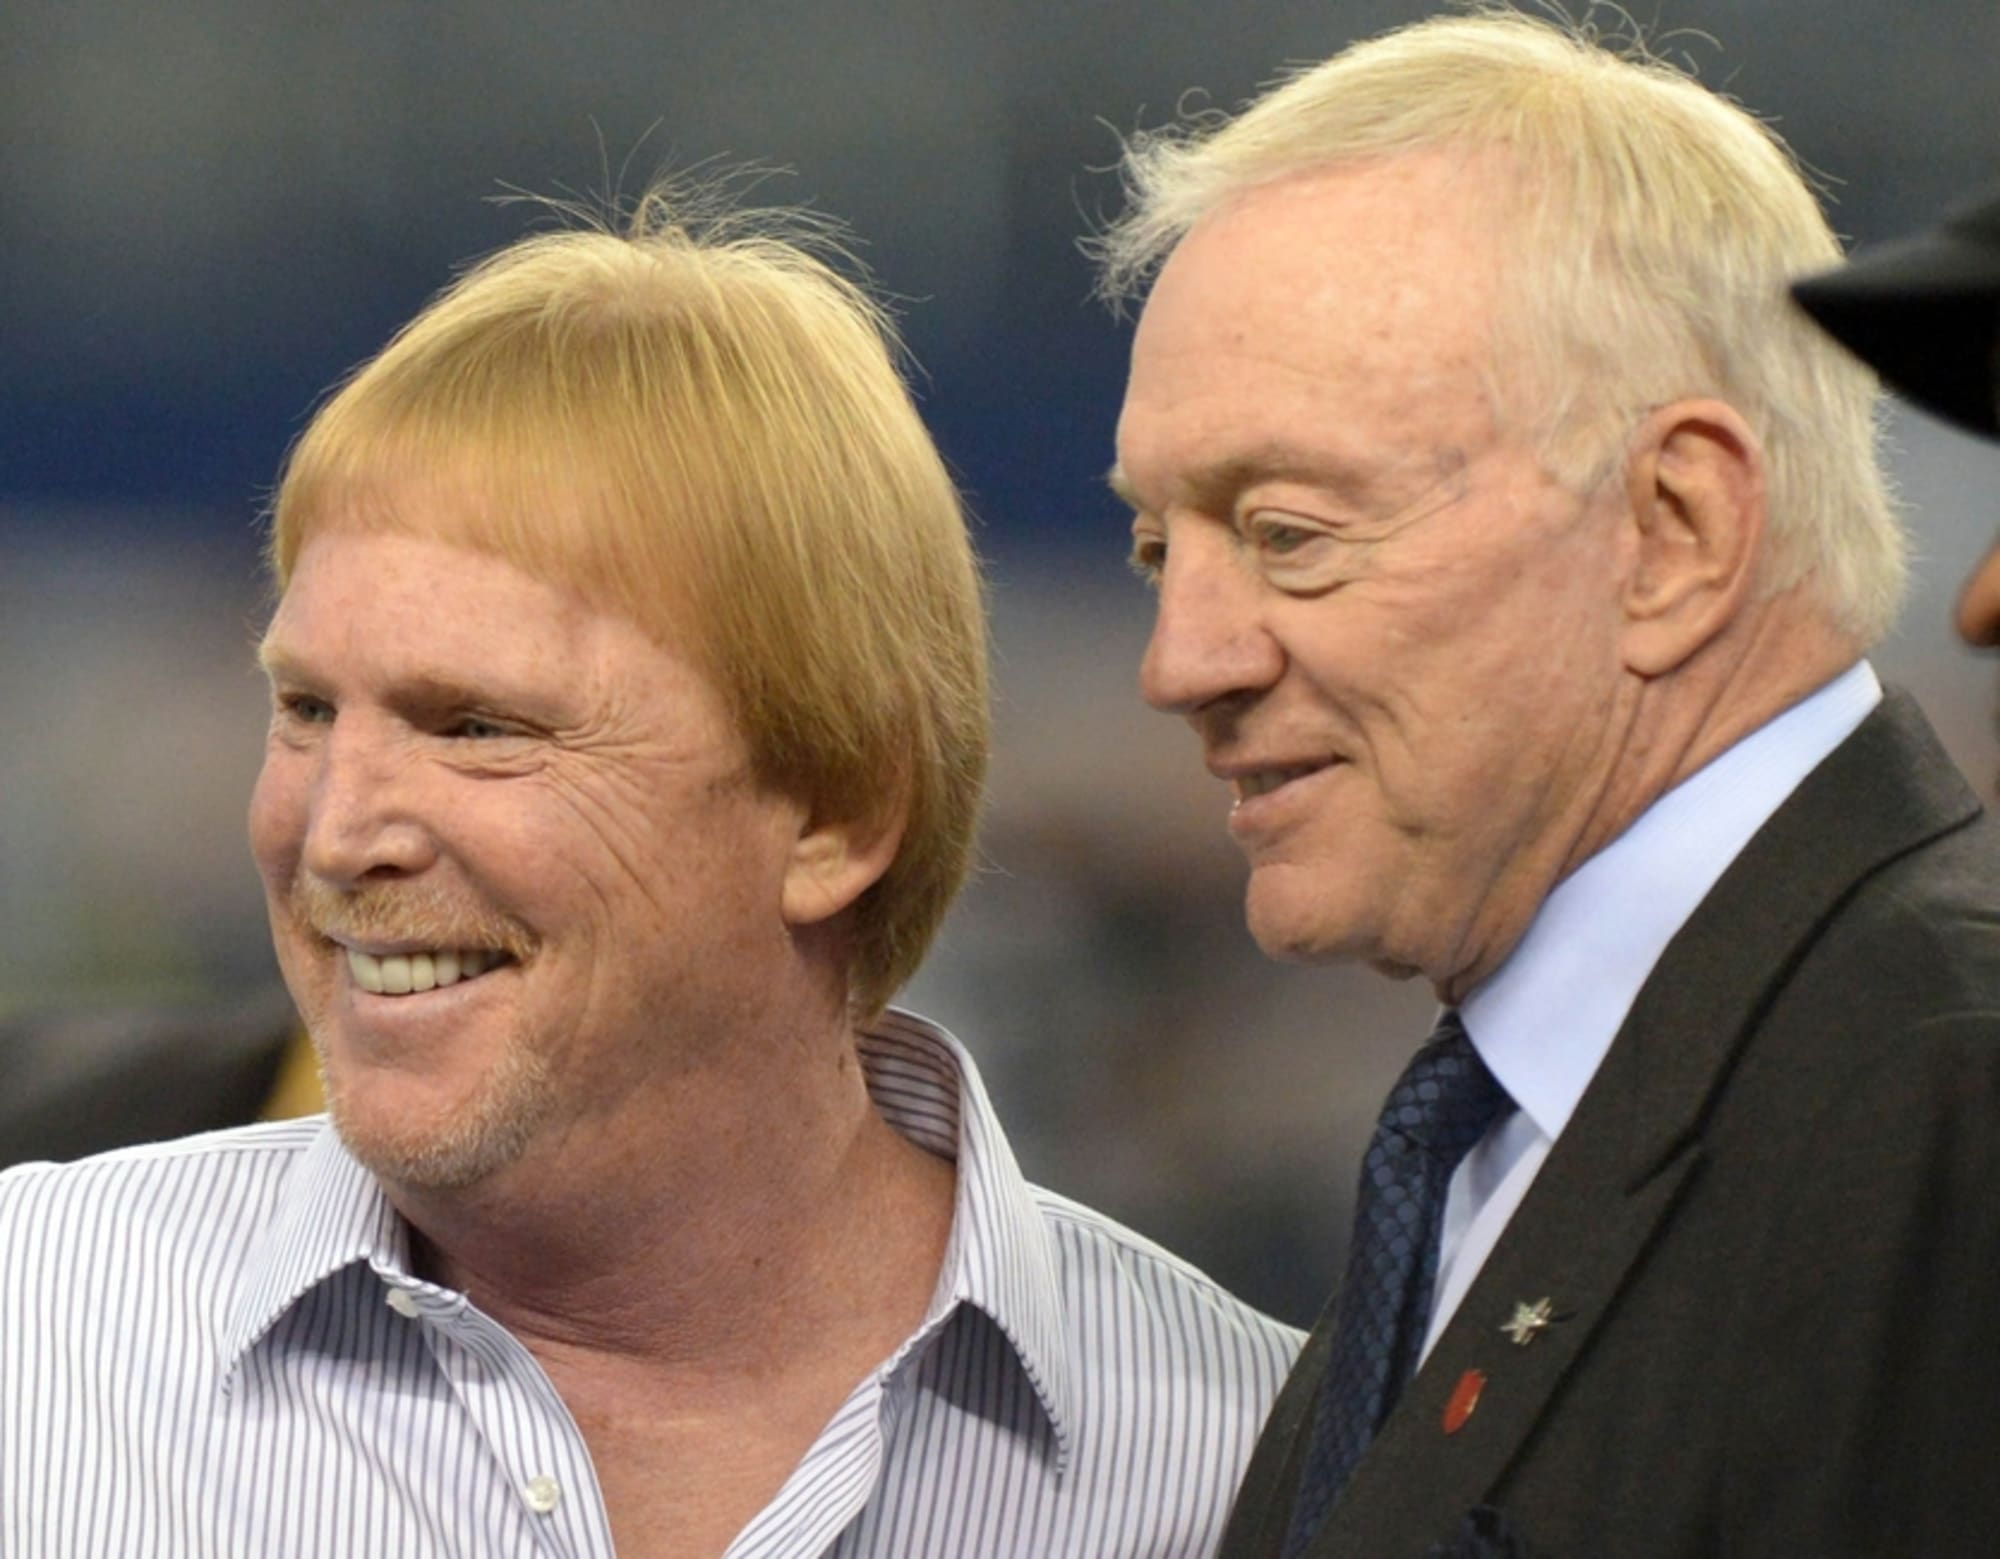 NFL Owners The 5 worst in professional football